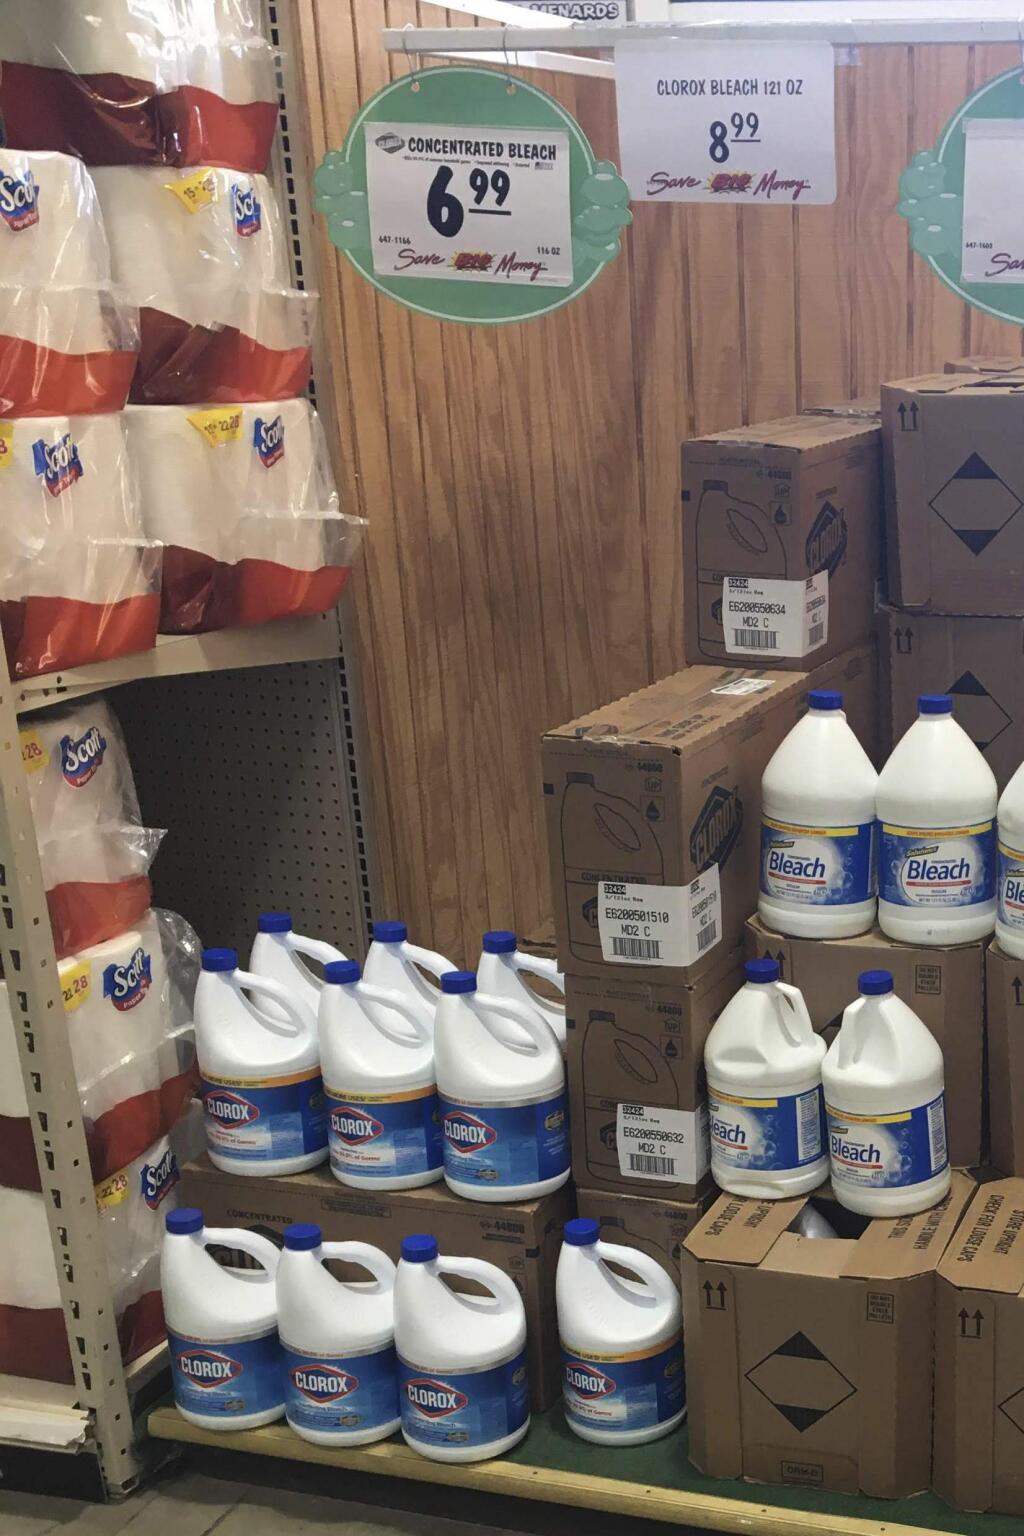 This March 10, 2020 photo made by an investigator with the Michigan Attorney General's Office shows gallons of Clorox bleach on display priced at $8.99 each at a Menards store in Jackson, Mich. A price sticker on an empty shelf elsewhere in the store listed it as $4.47. (Michigan Attorney General's Office via AP)